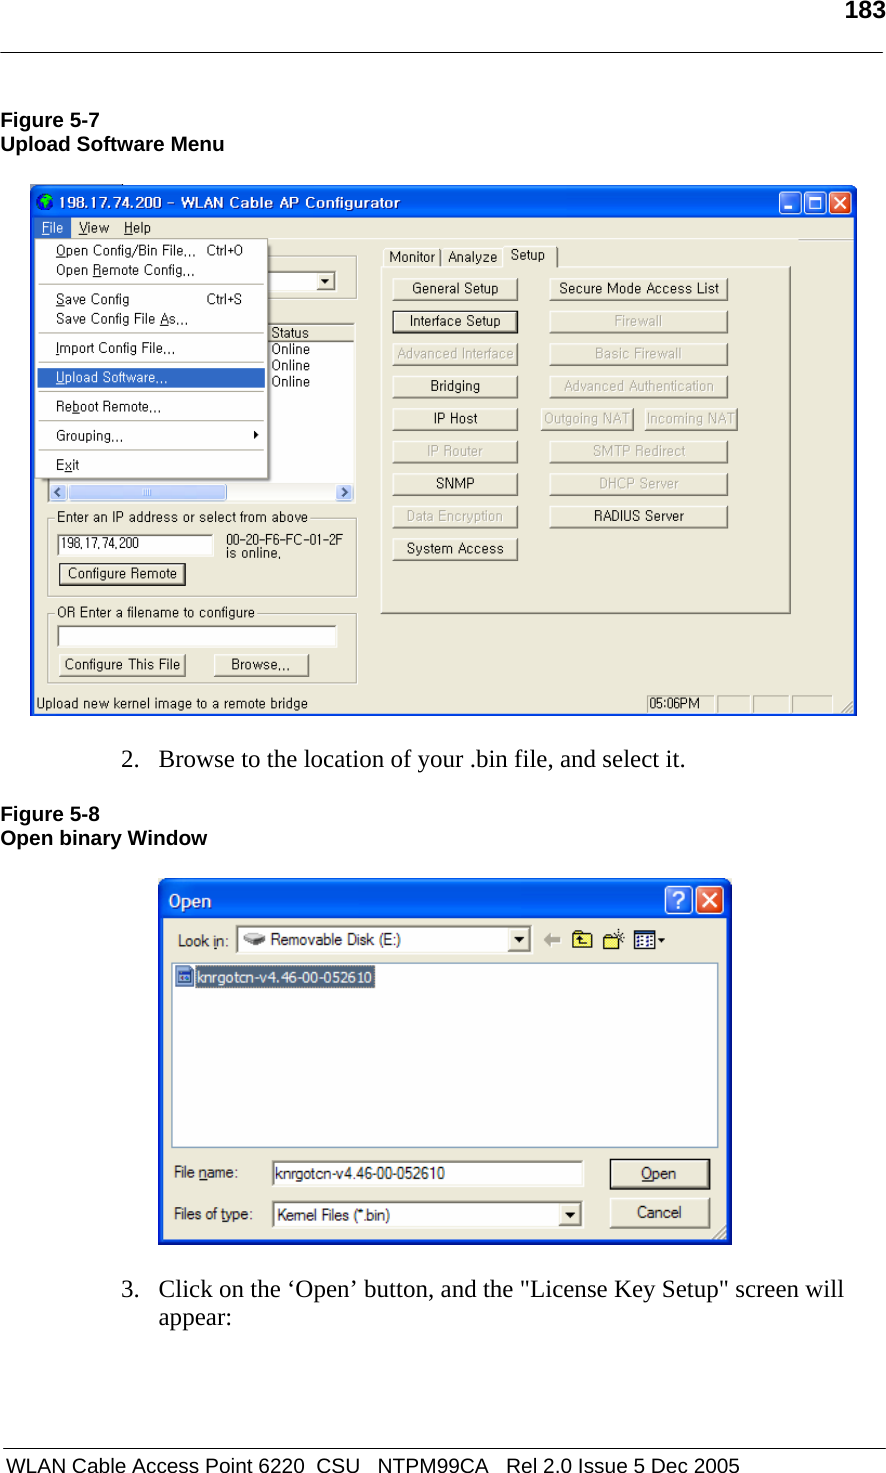   183   WLAN Cable Access Point 6220  CSU   NTPM99CA   Rel 2.0 Issue 5 Dec 2005 Figure 5-7 Upload Software Menu    2. Browse to the location of your .bin file, and select it.  Figure 5-8 Open binary Window   3. Click on the ‘Open’ button, and the &quot;License Key Setup&quot; screen will appear:  